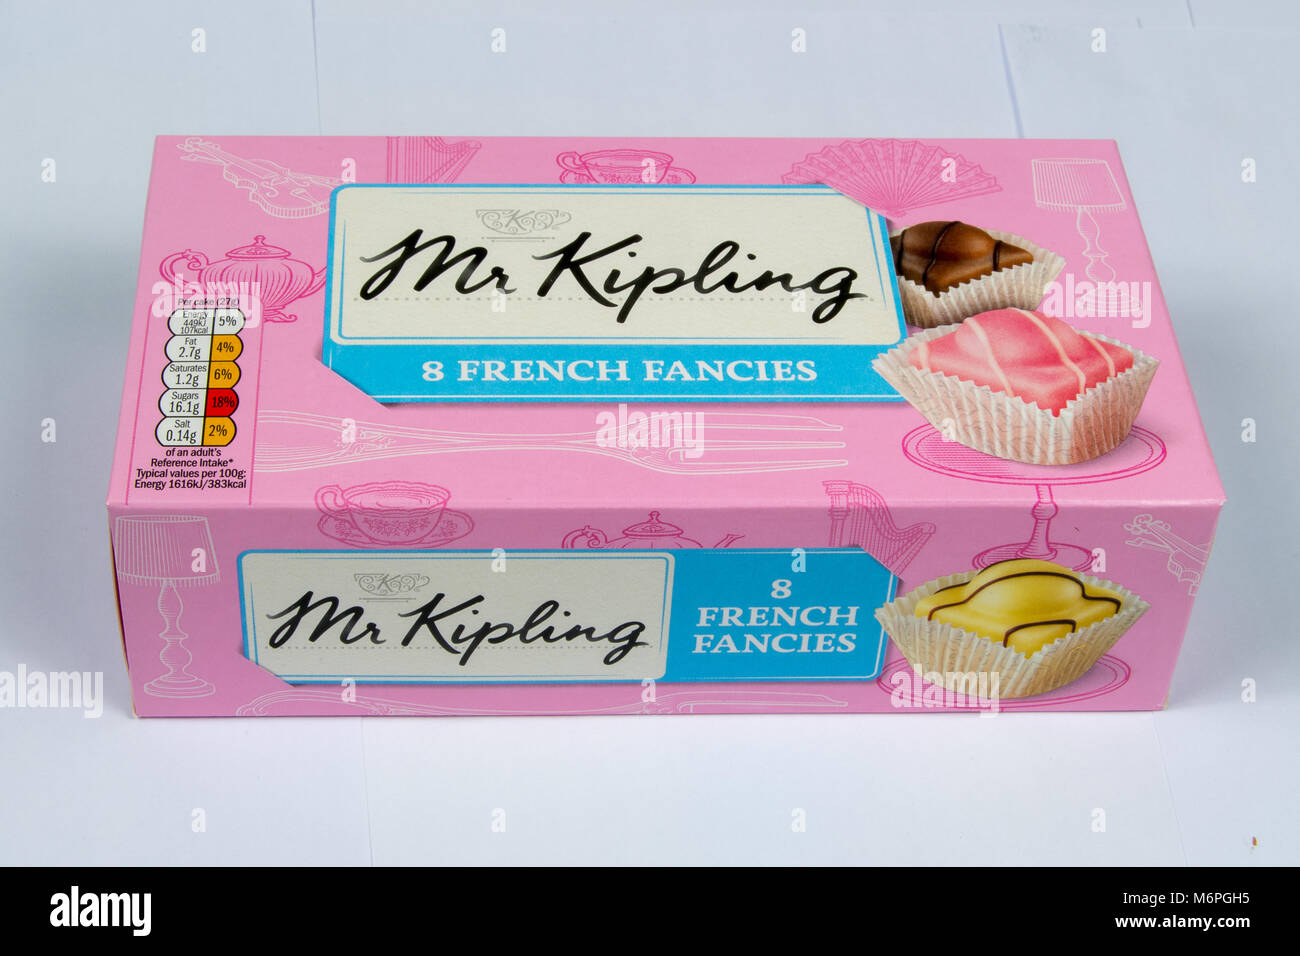 CHESTER, UK - MARCH 4TH 2018: Box of Mr Kipling French Fancies cakes Stock Photo